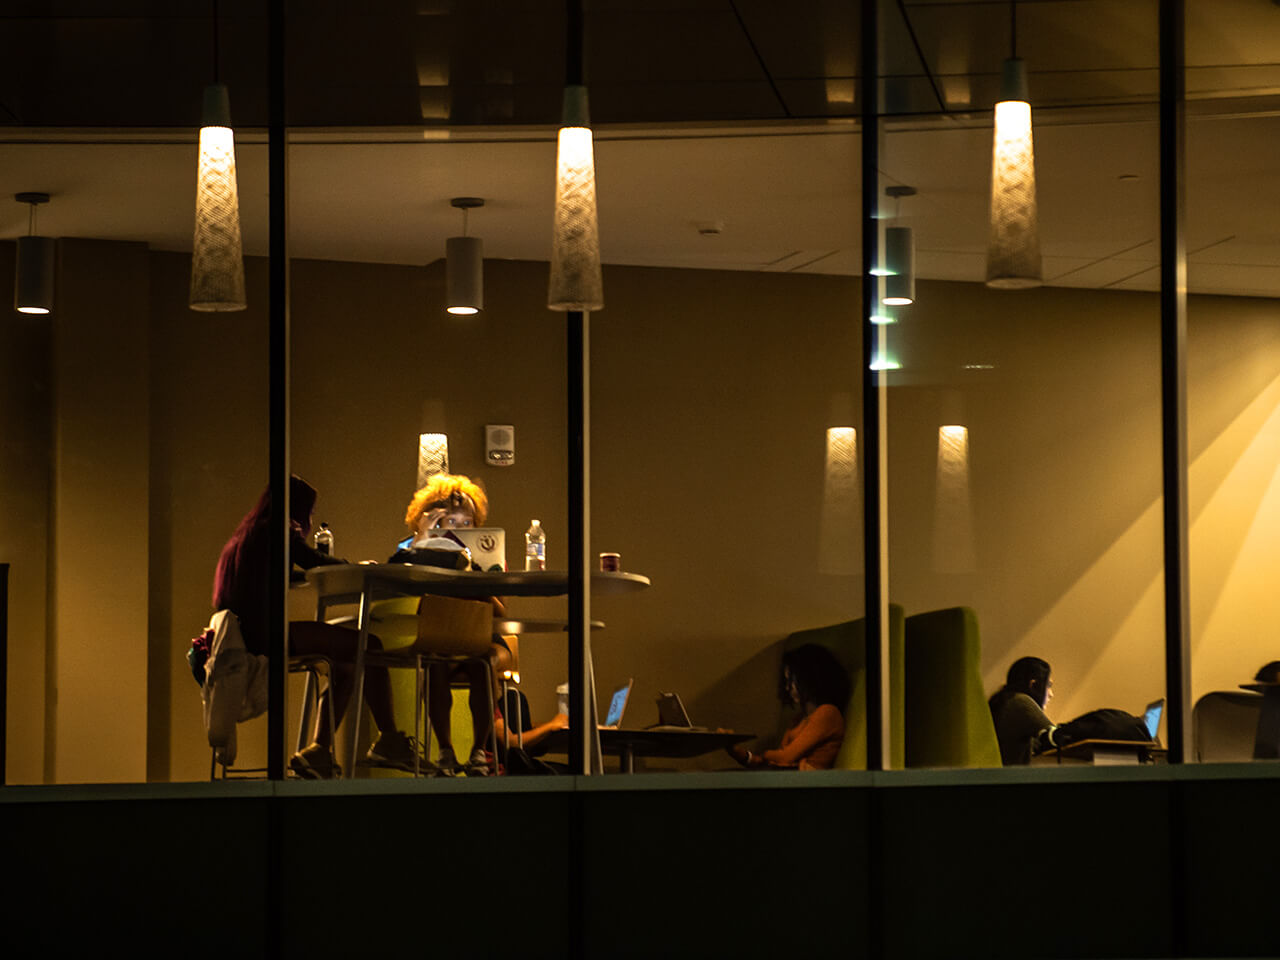 Students studying at night in the library